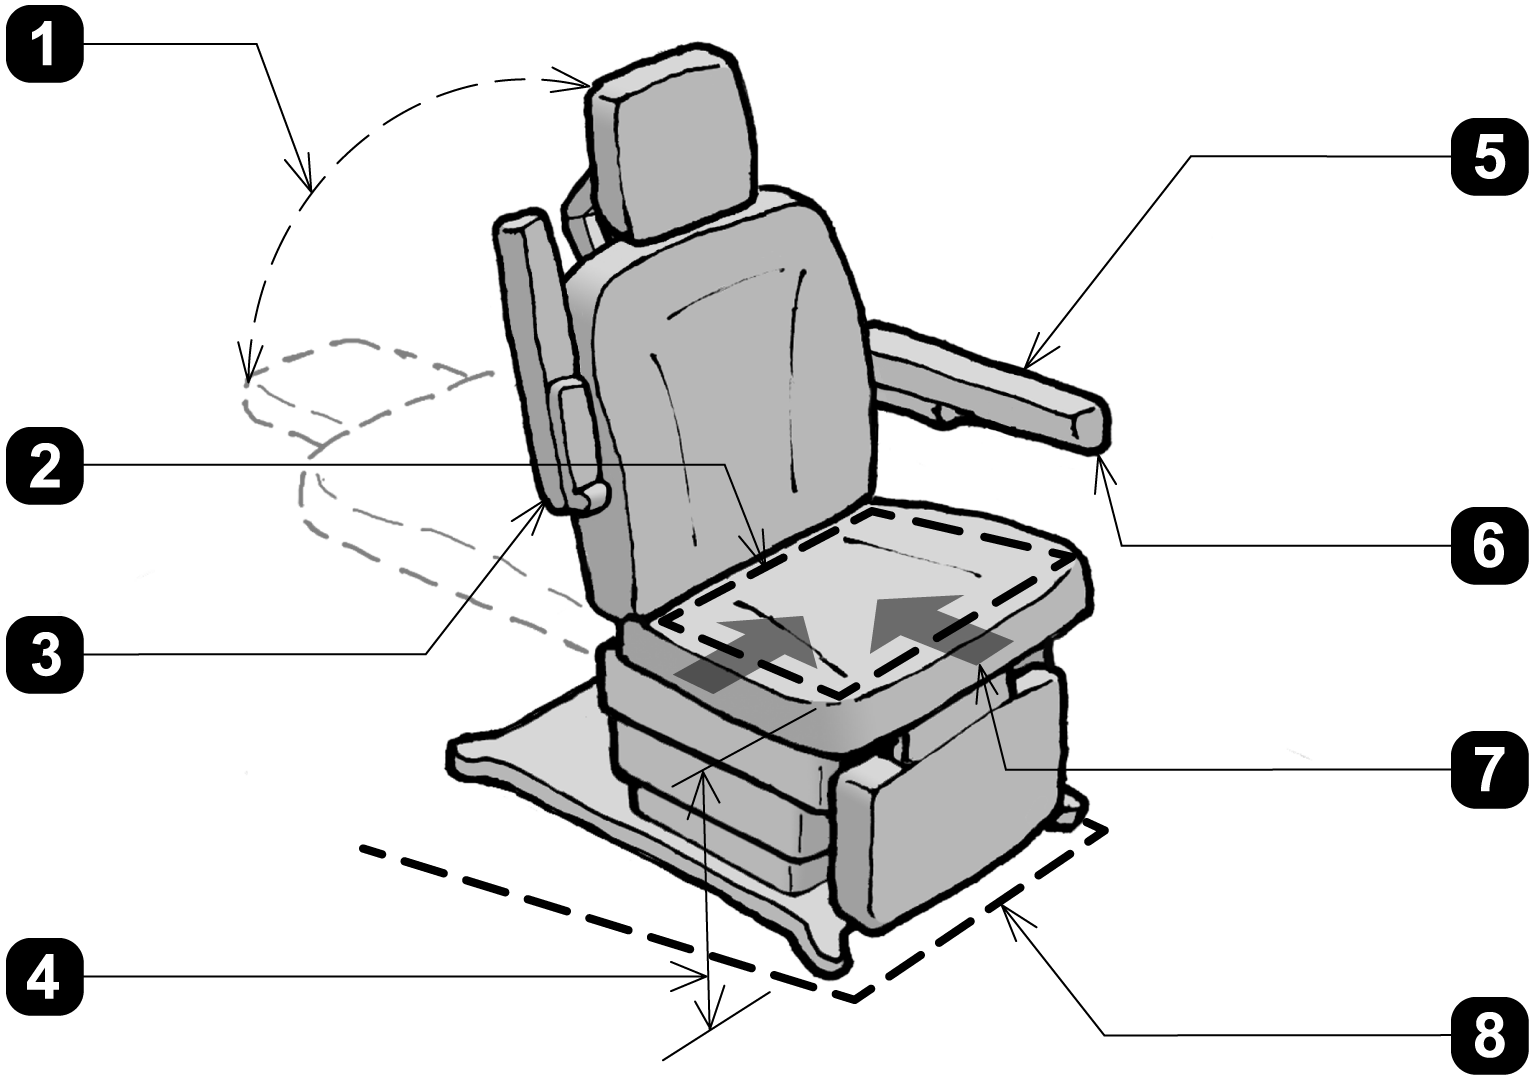 Three-dimensional view of a height adjustable exam chair showing features and minimum dimensions required by the proposed Standards.